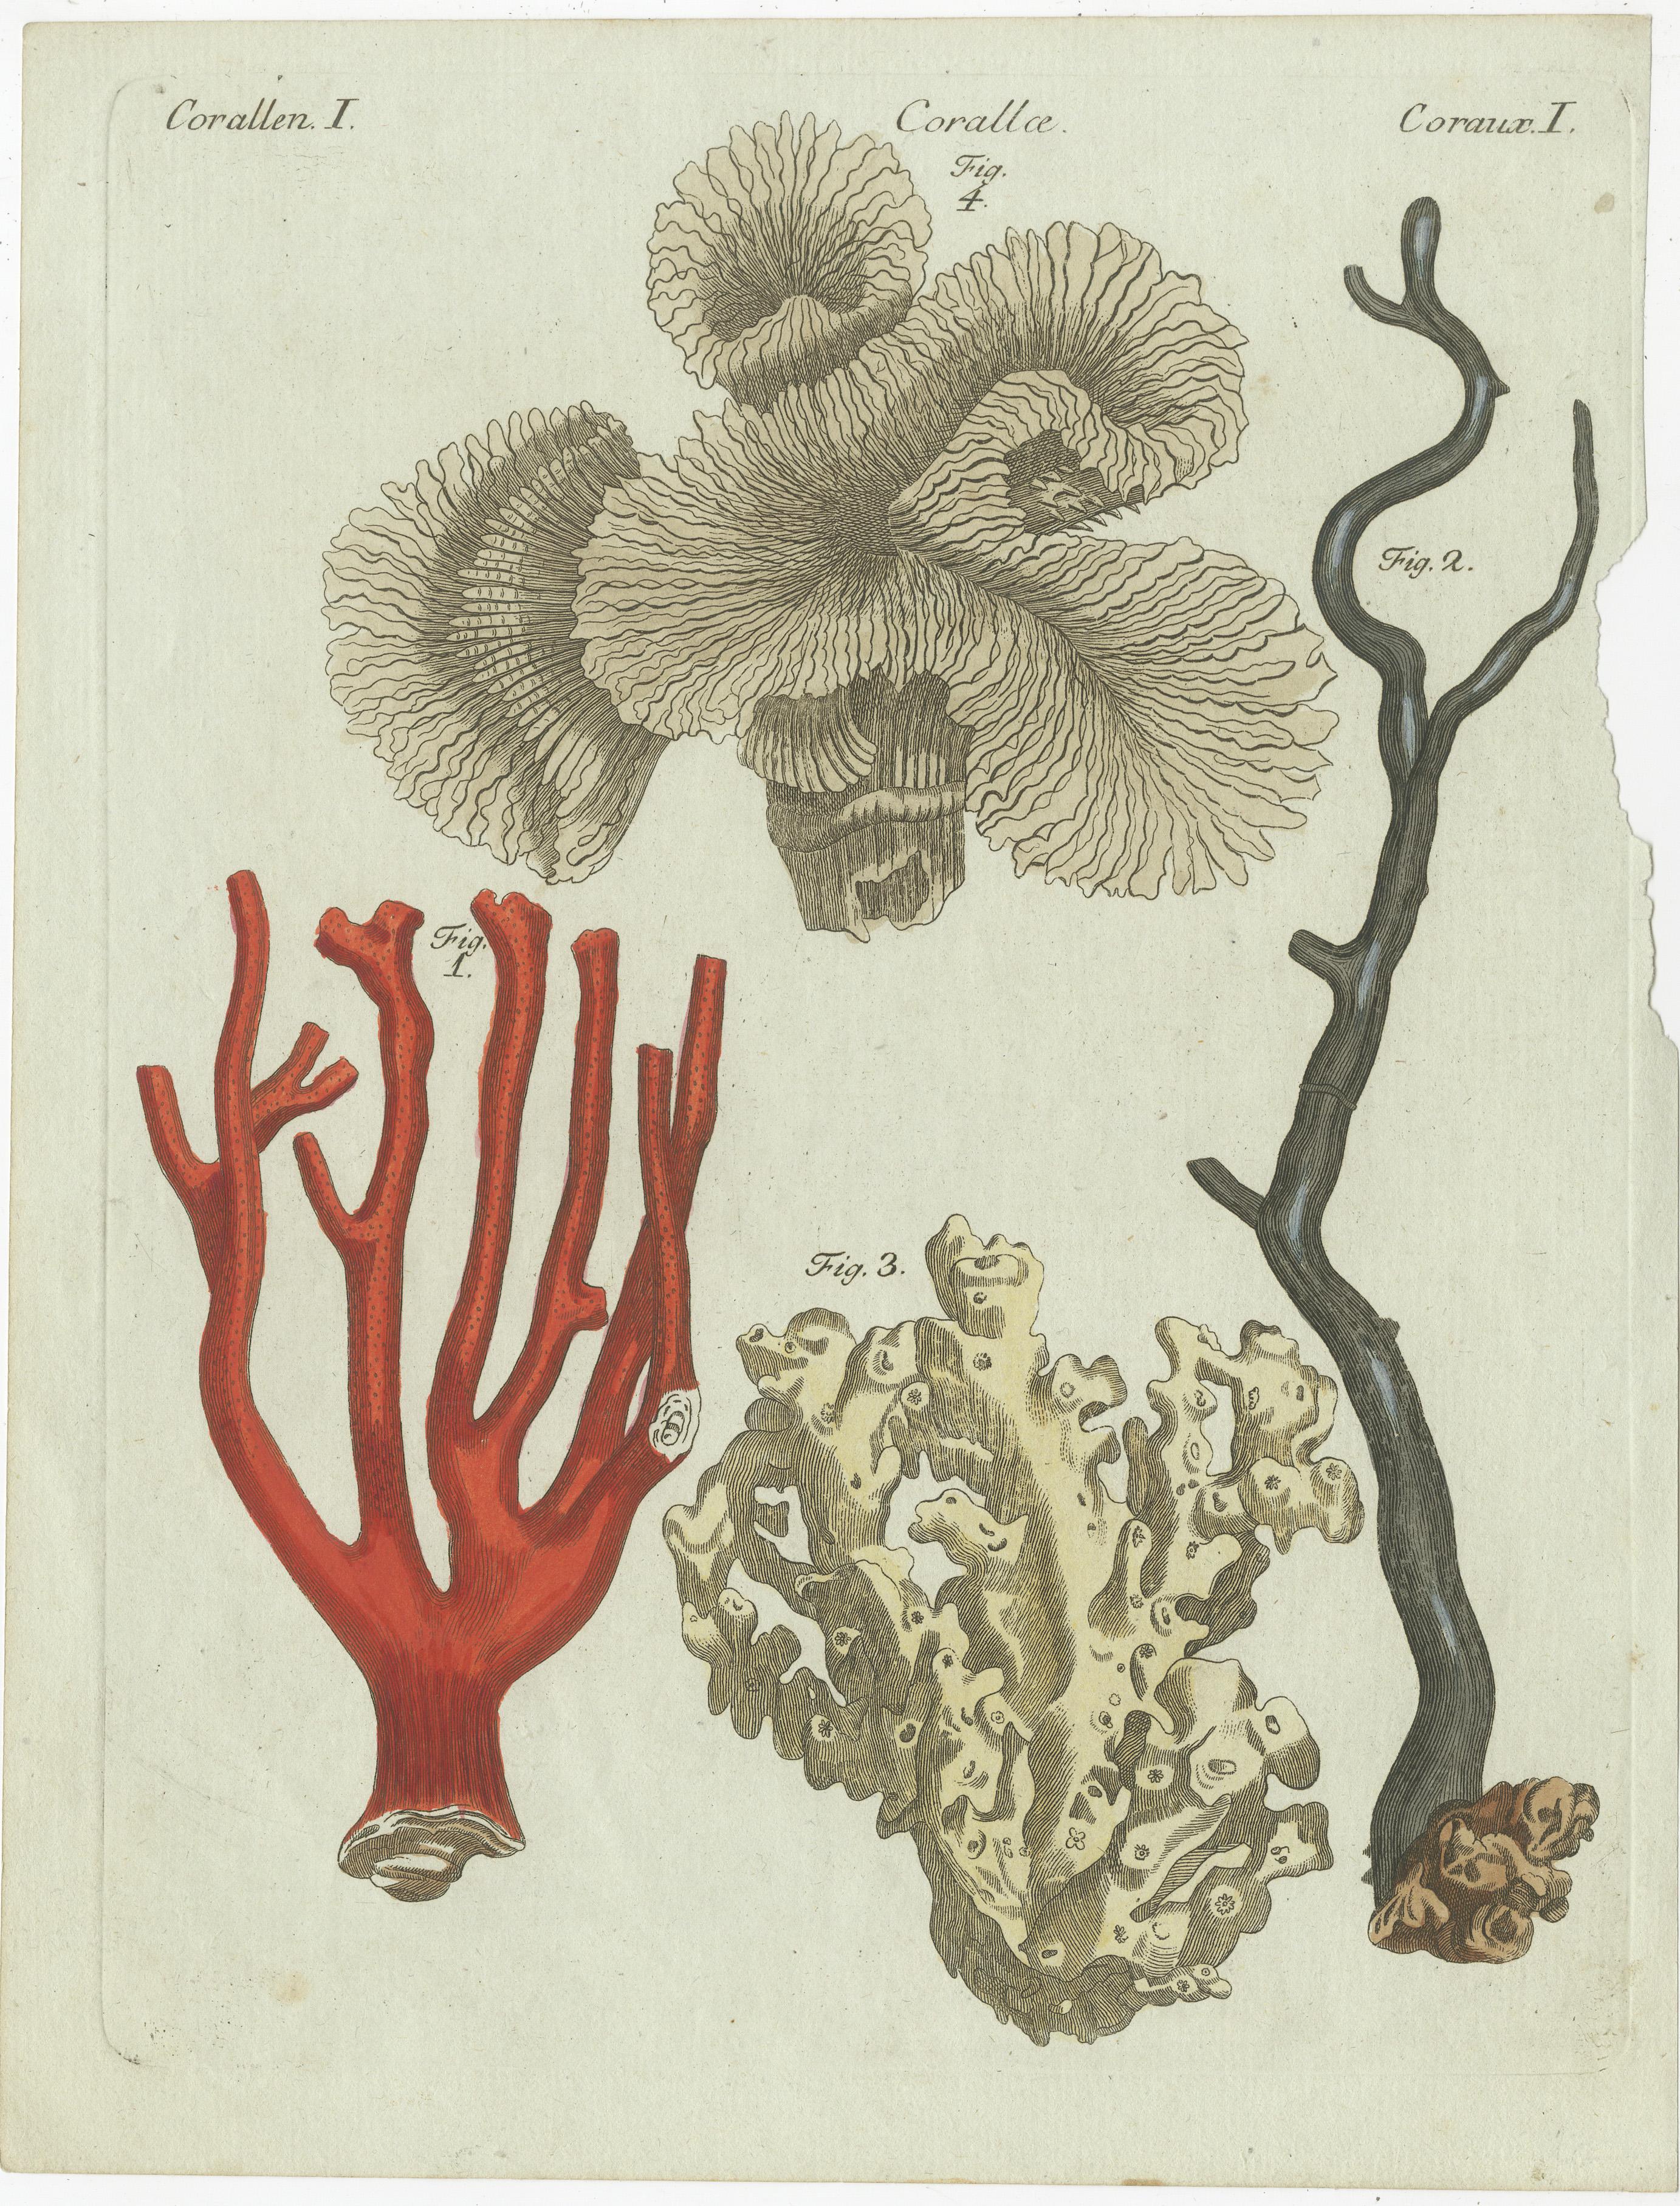 Original antique print of various corals. Red coral, Corallium rubrum 1, sea fan, Gorgonia antipathes 2, common white stone coral 3 and staghorn coral, Acropora florida 4. This print originates from 'Bilderbuch fur Kinder' by F.J. Bertuch. Friedrich